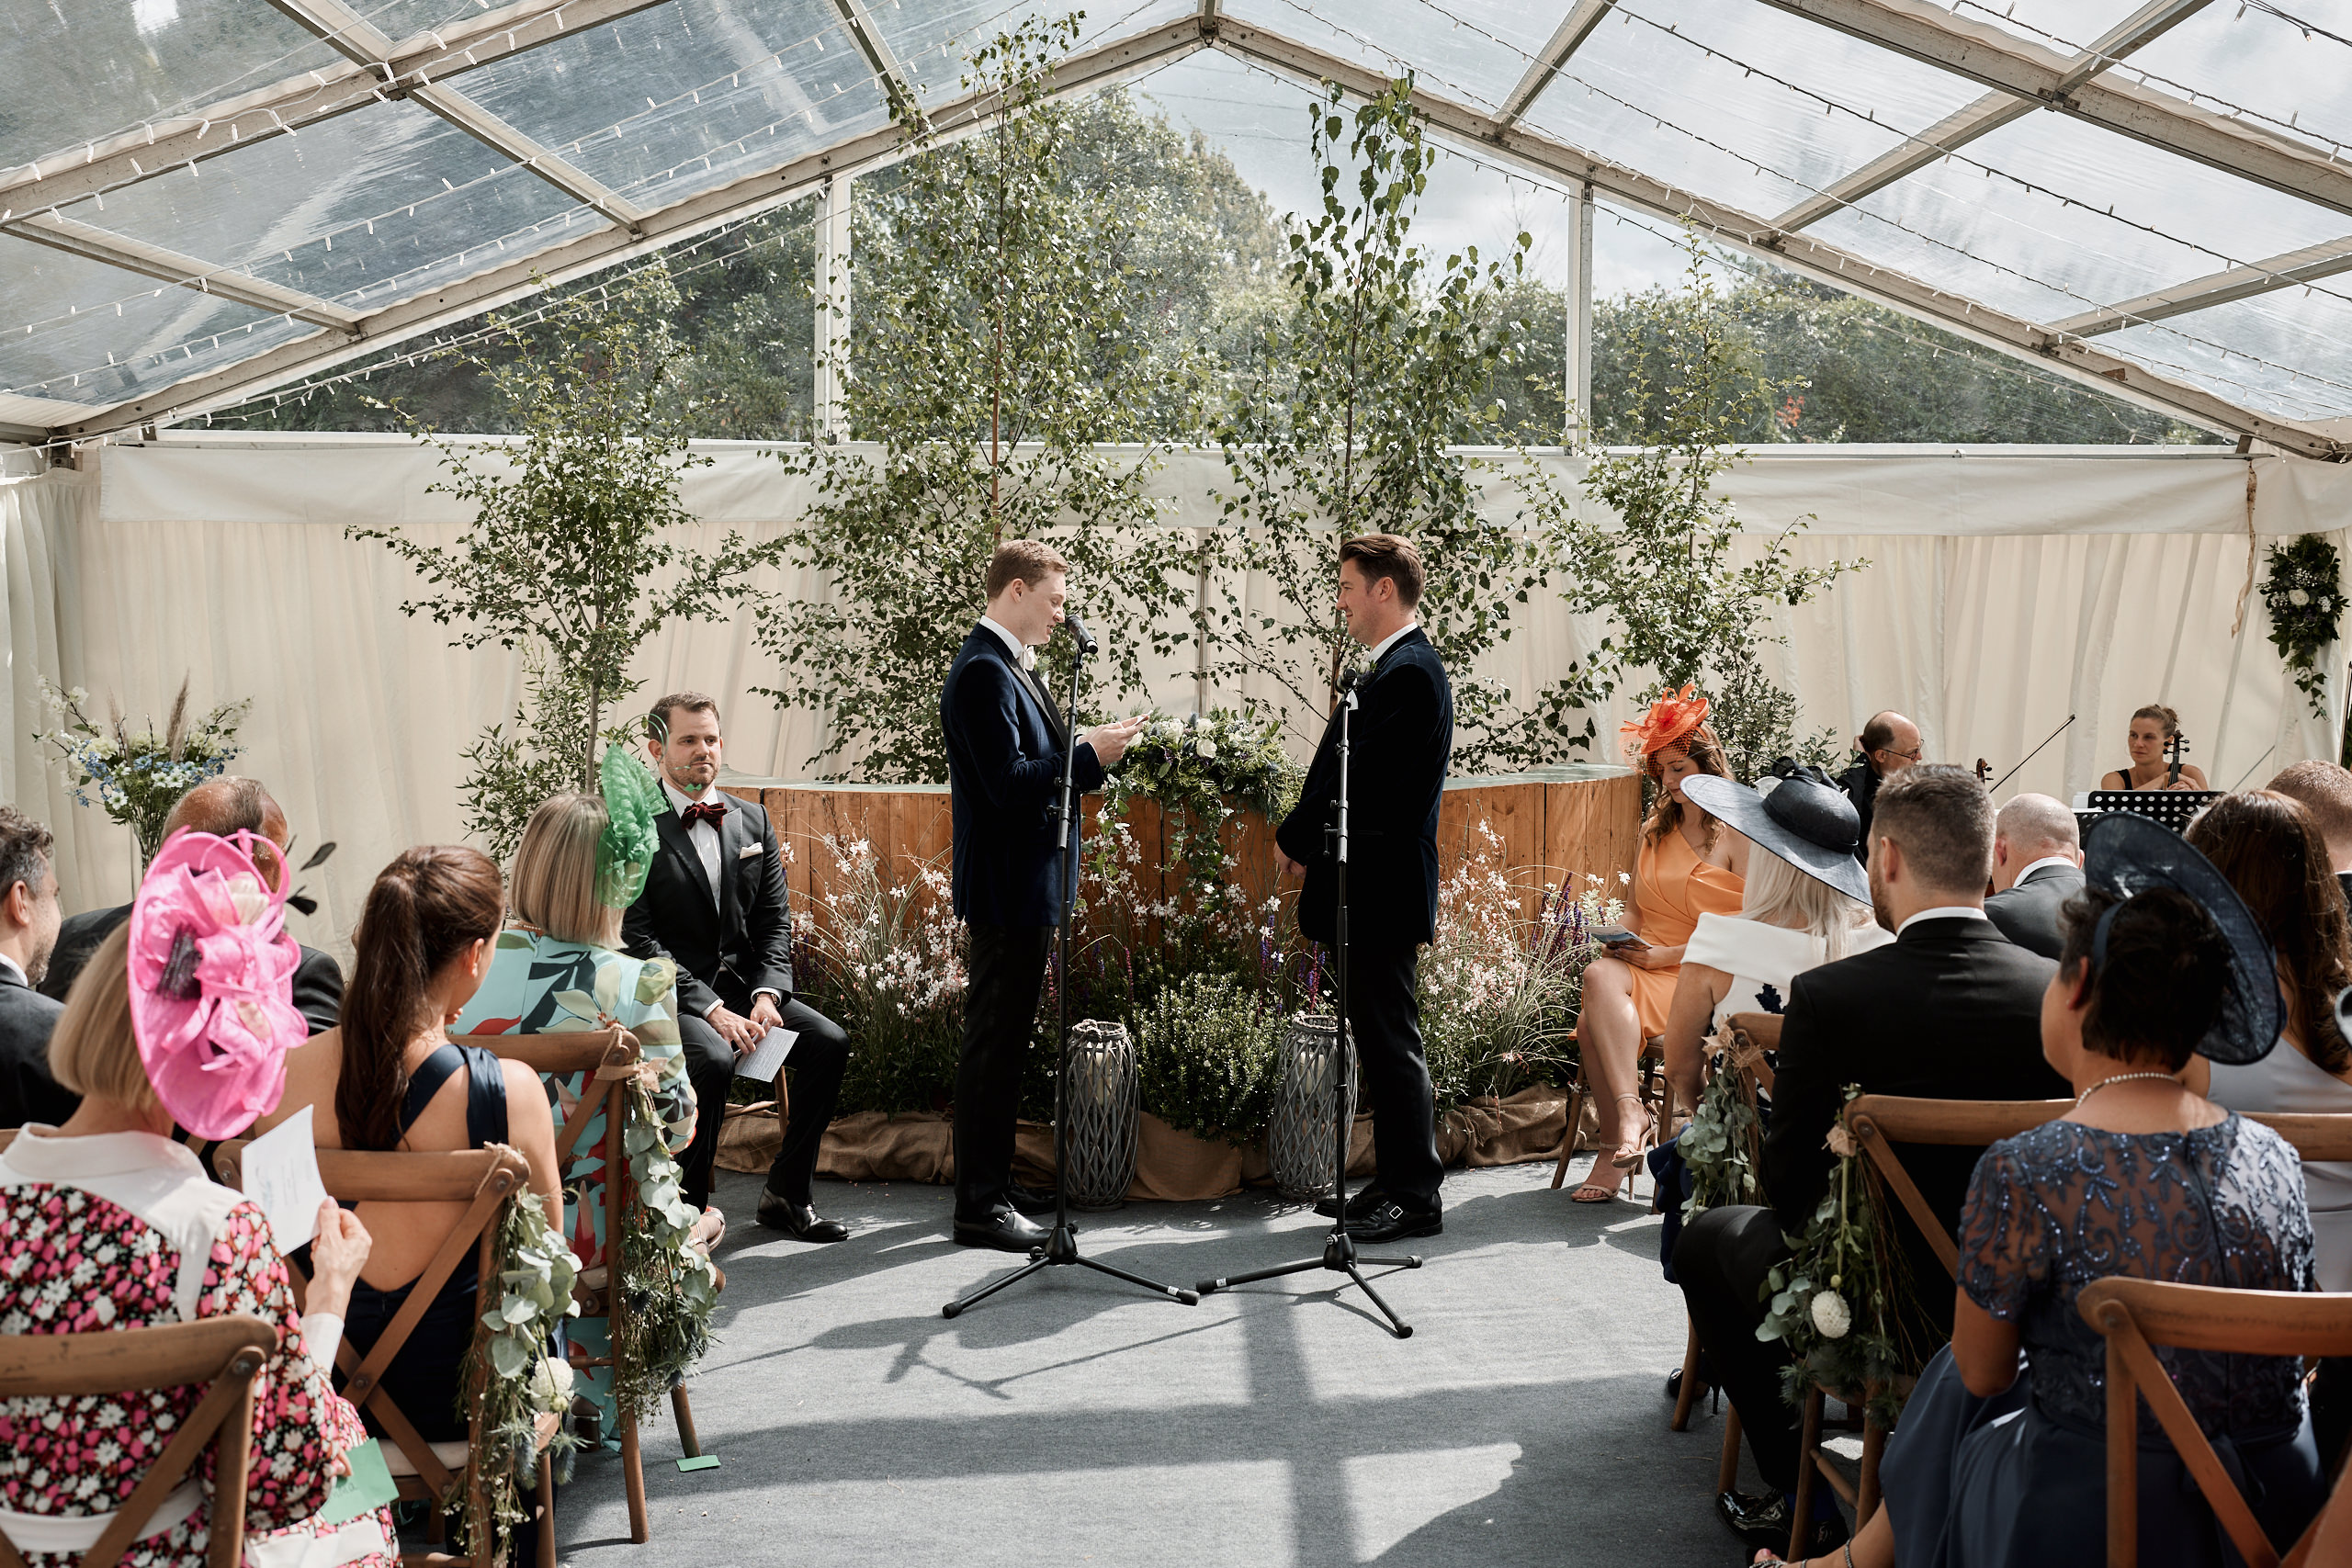 A wedding taking place in a tent.